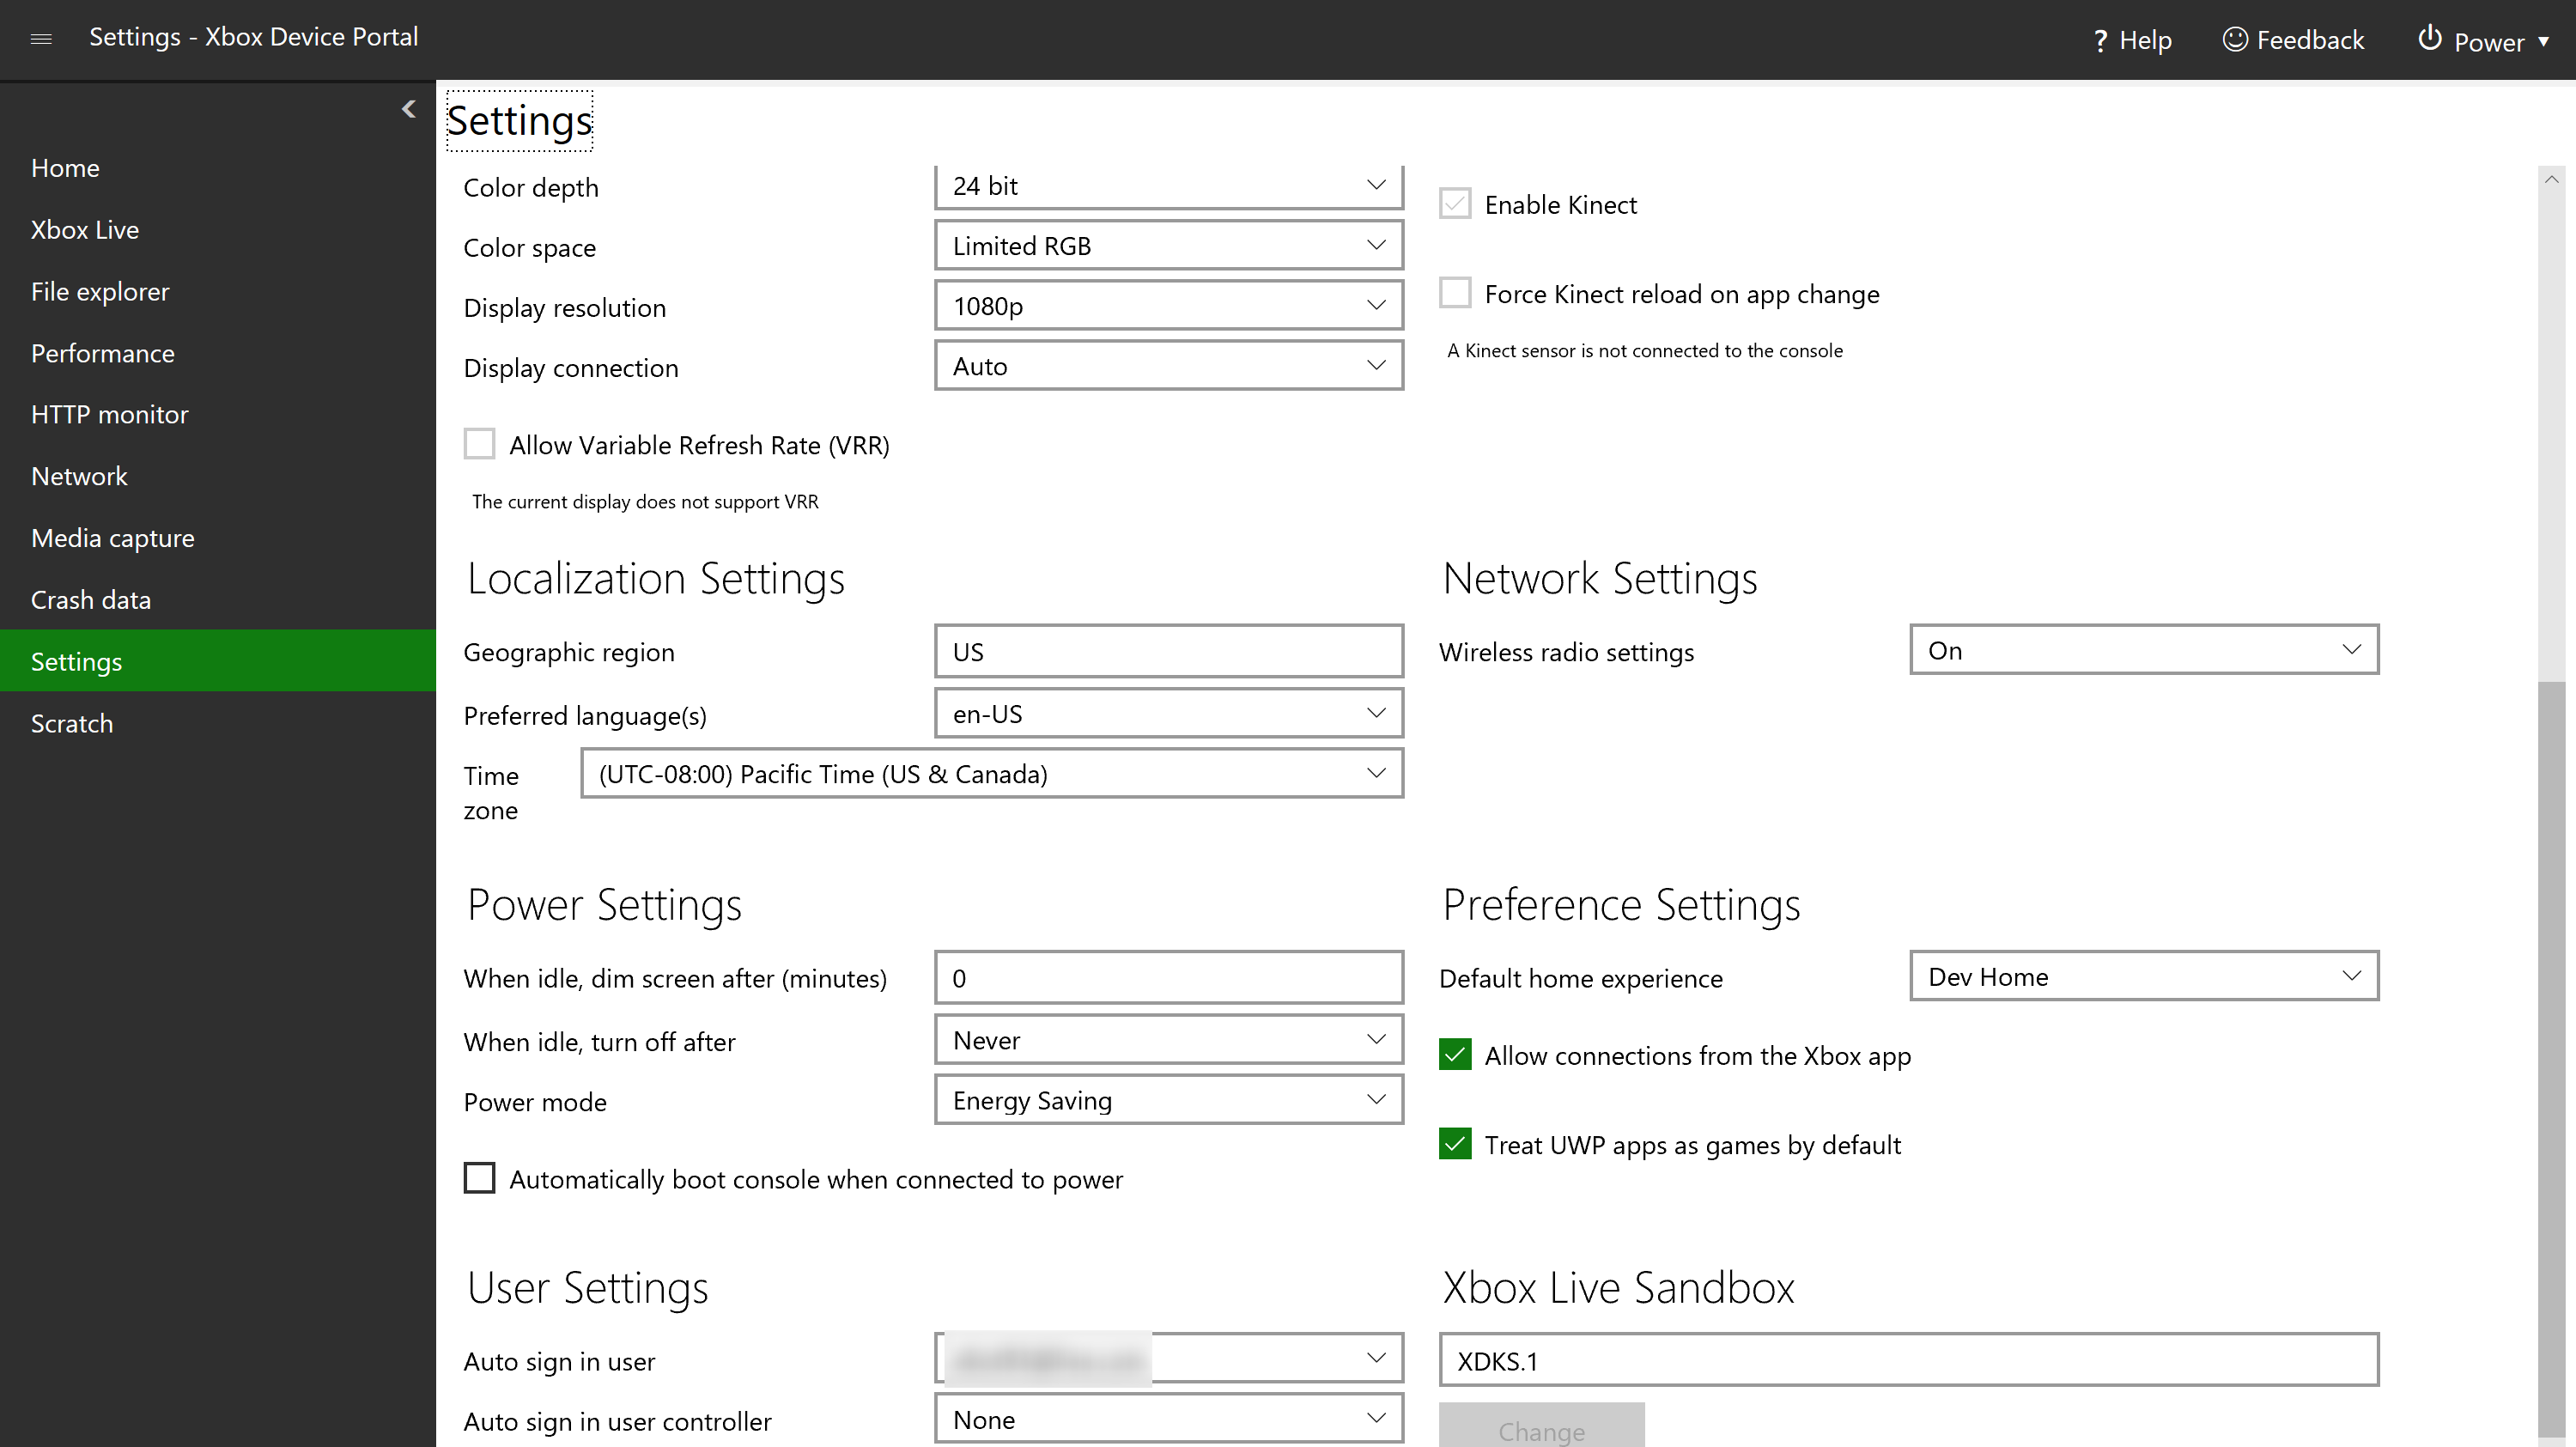 Screenshot of the Settings page showing the Localization Settings, Power Settings and User Settings sections.